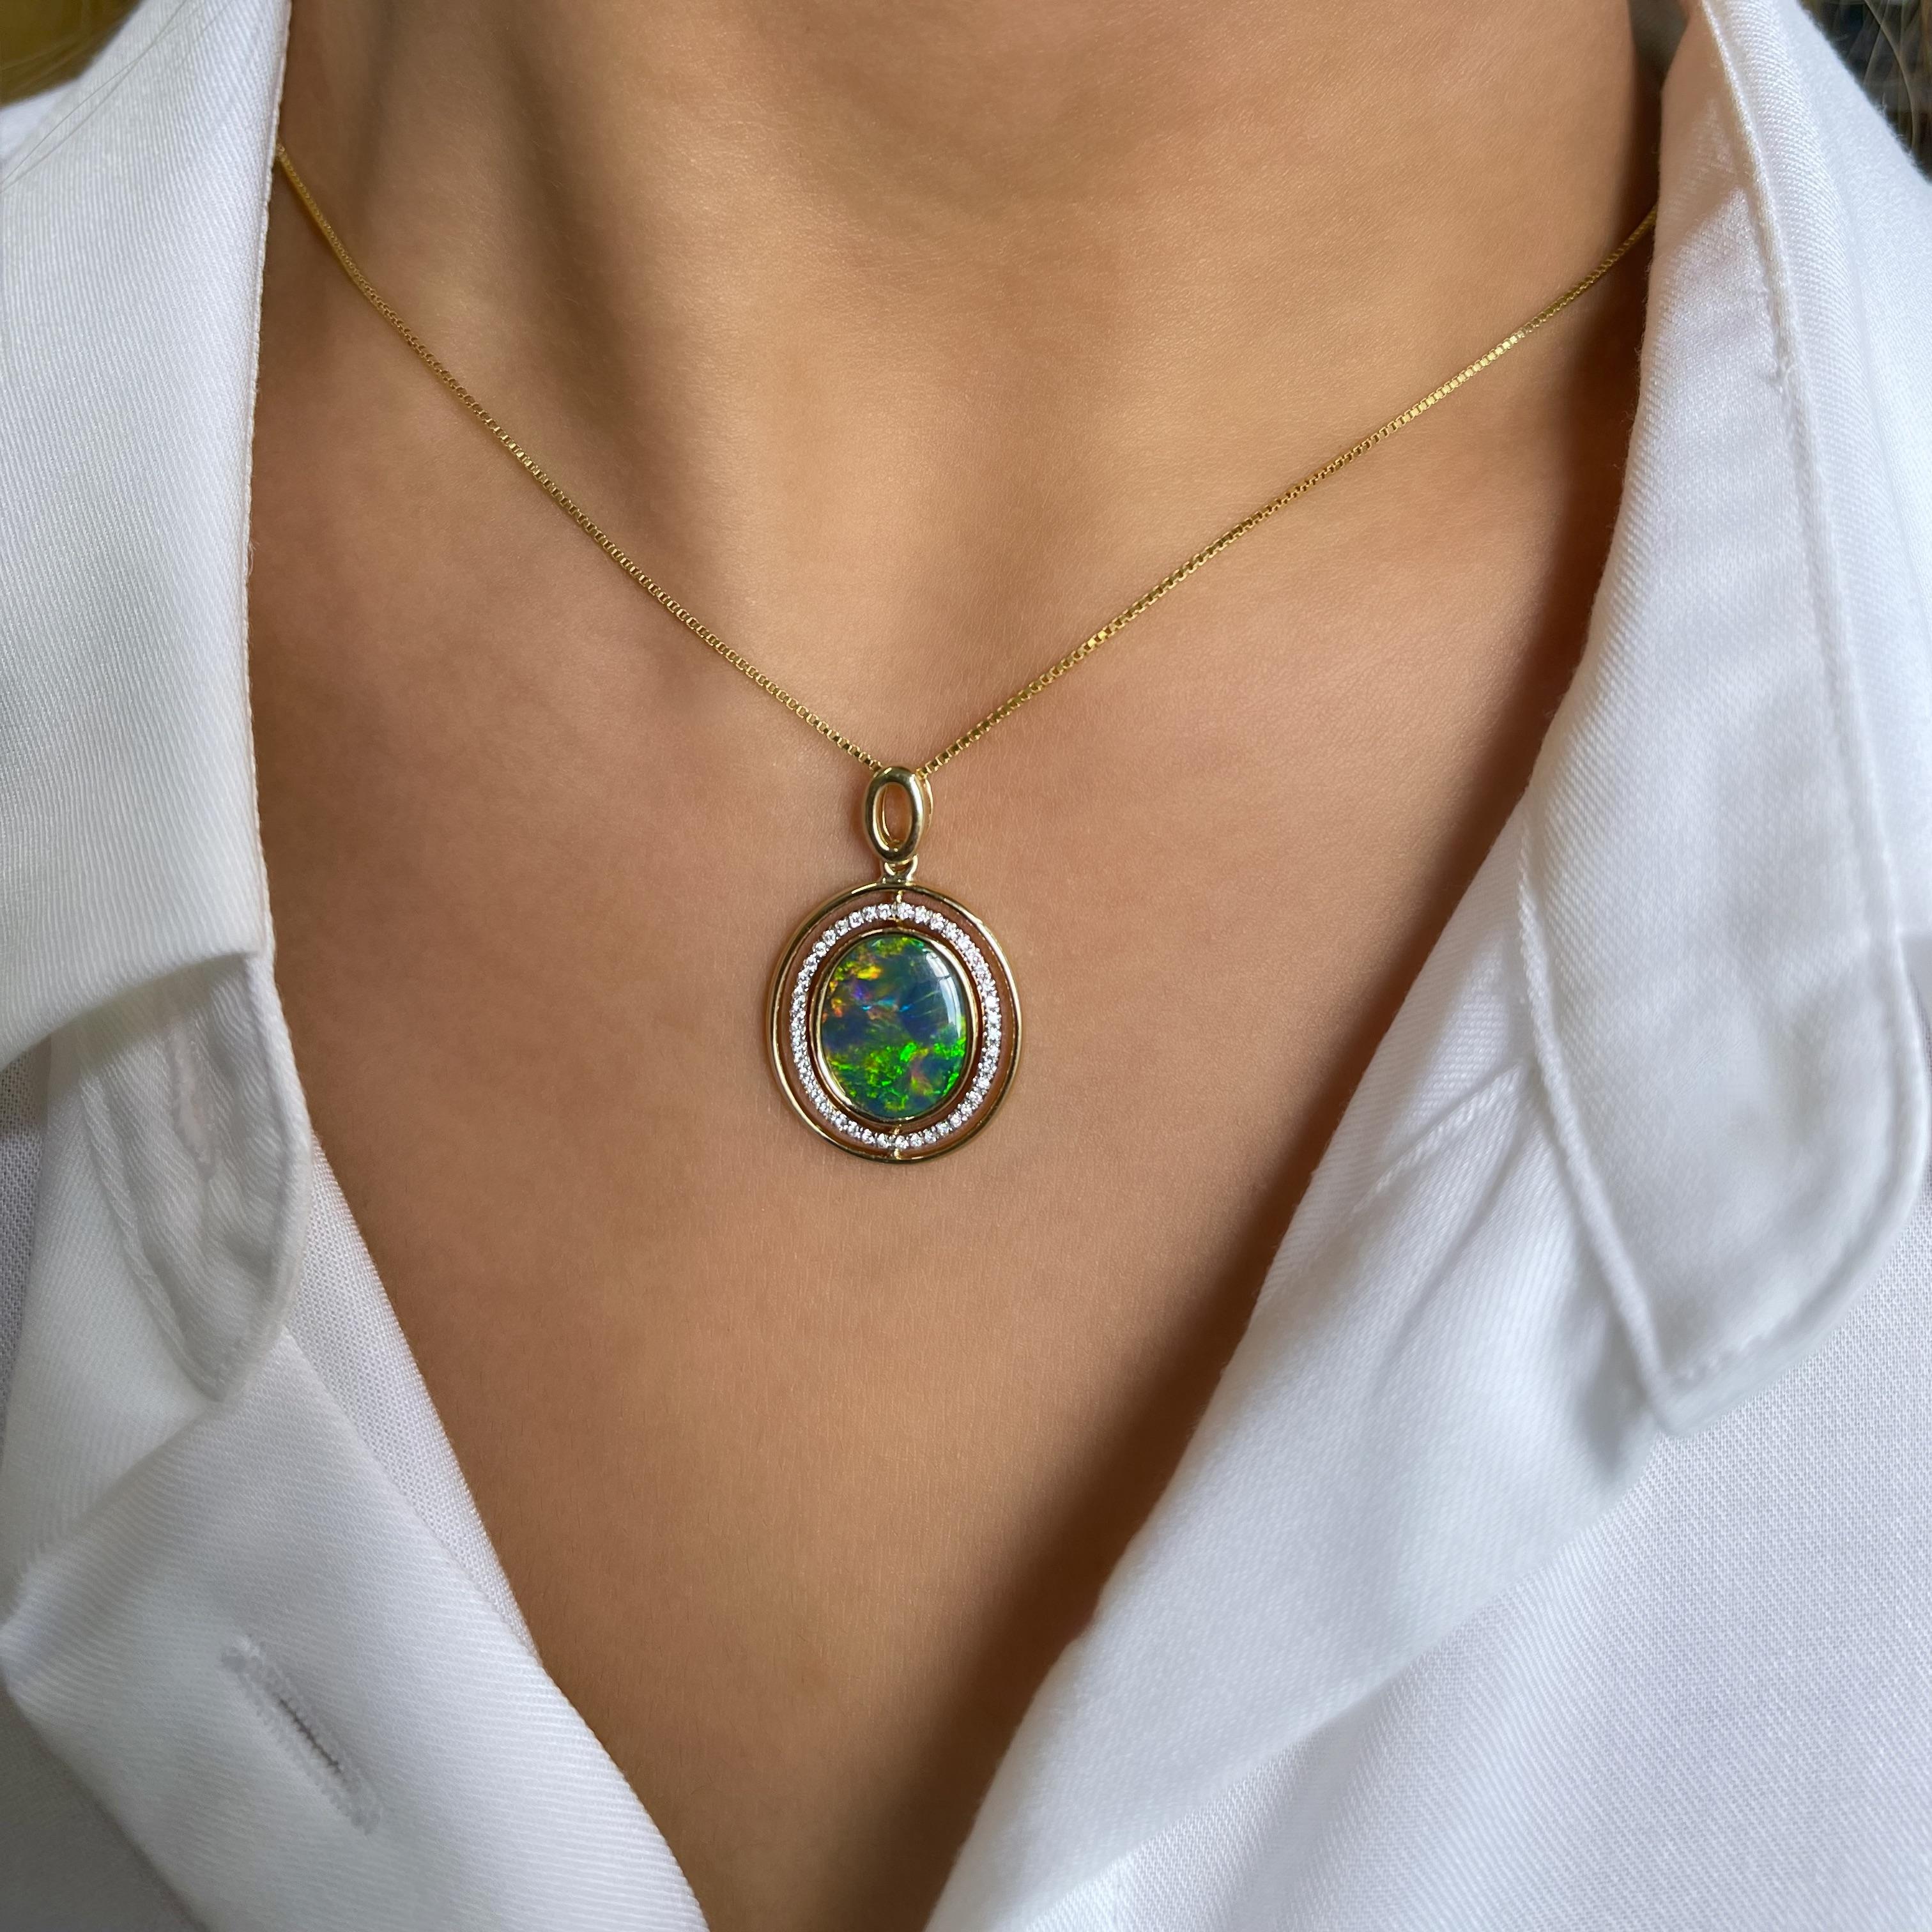 Designed by Renata Bernard, ‘Affection’ opal pendant was inspired by unconditional properties of love. The intense colours of natural boulder opal (2.65ct) are complemented by the inner halo of 42 twinkling diamonds that you can rotate anytime.